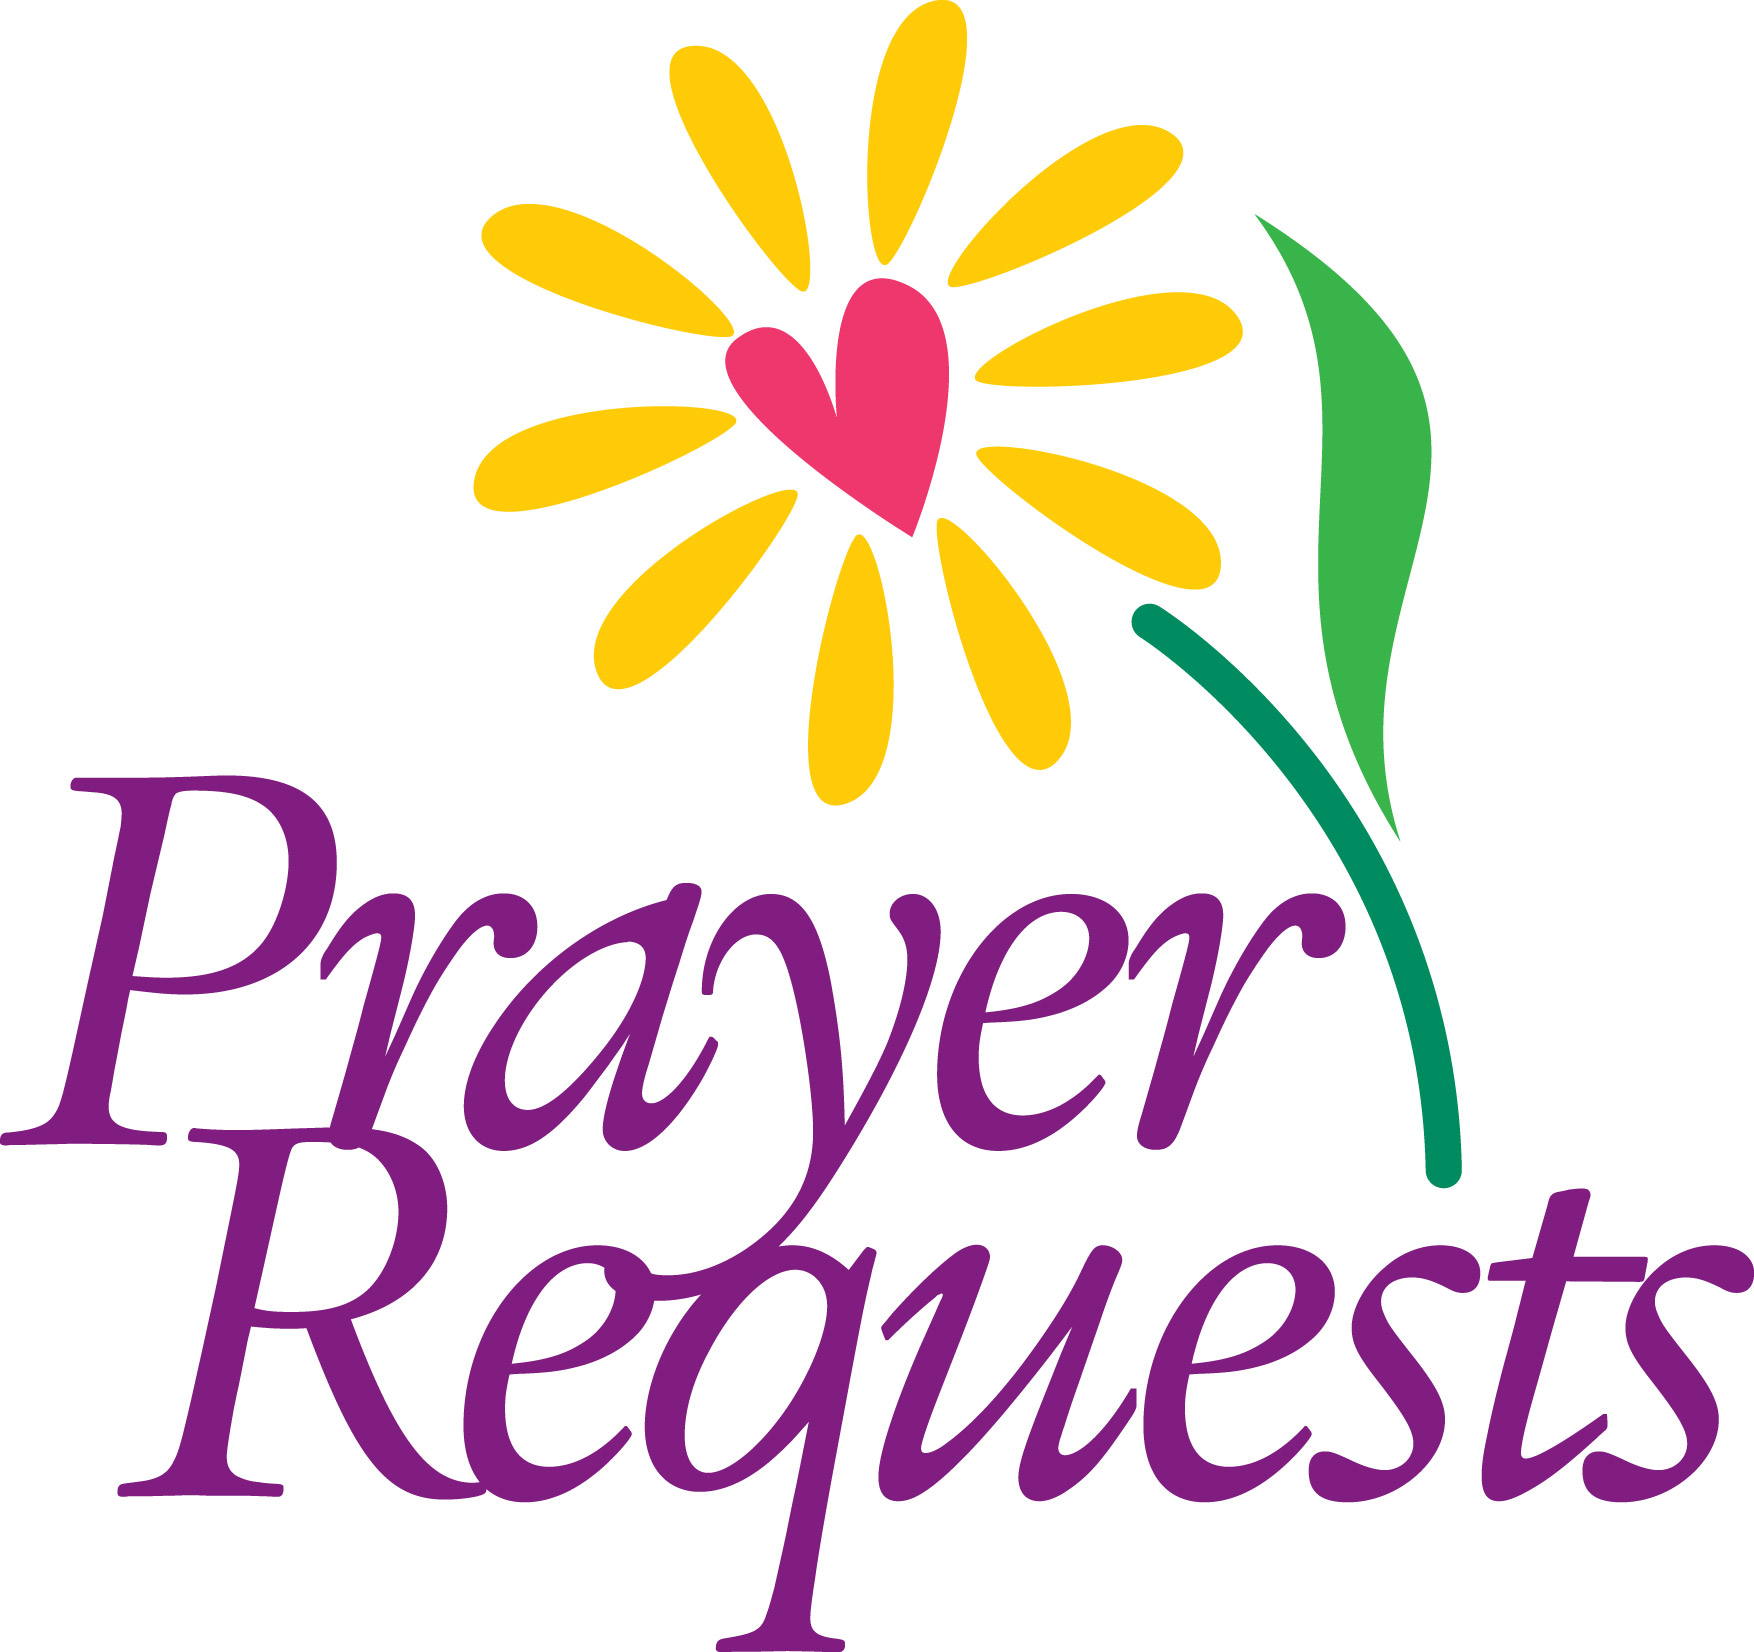 Group Prayer Images | Clipart Panda - Free Clipart Images